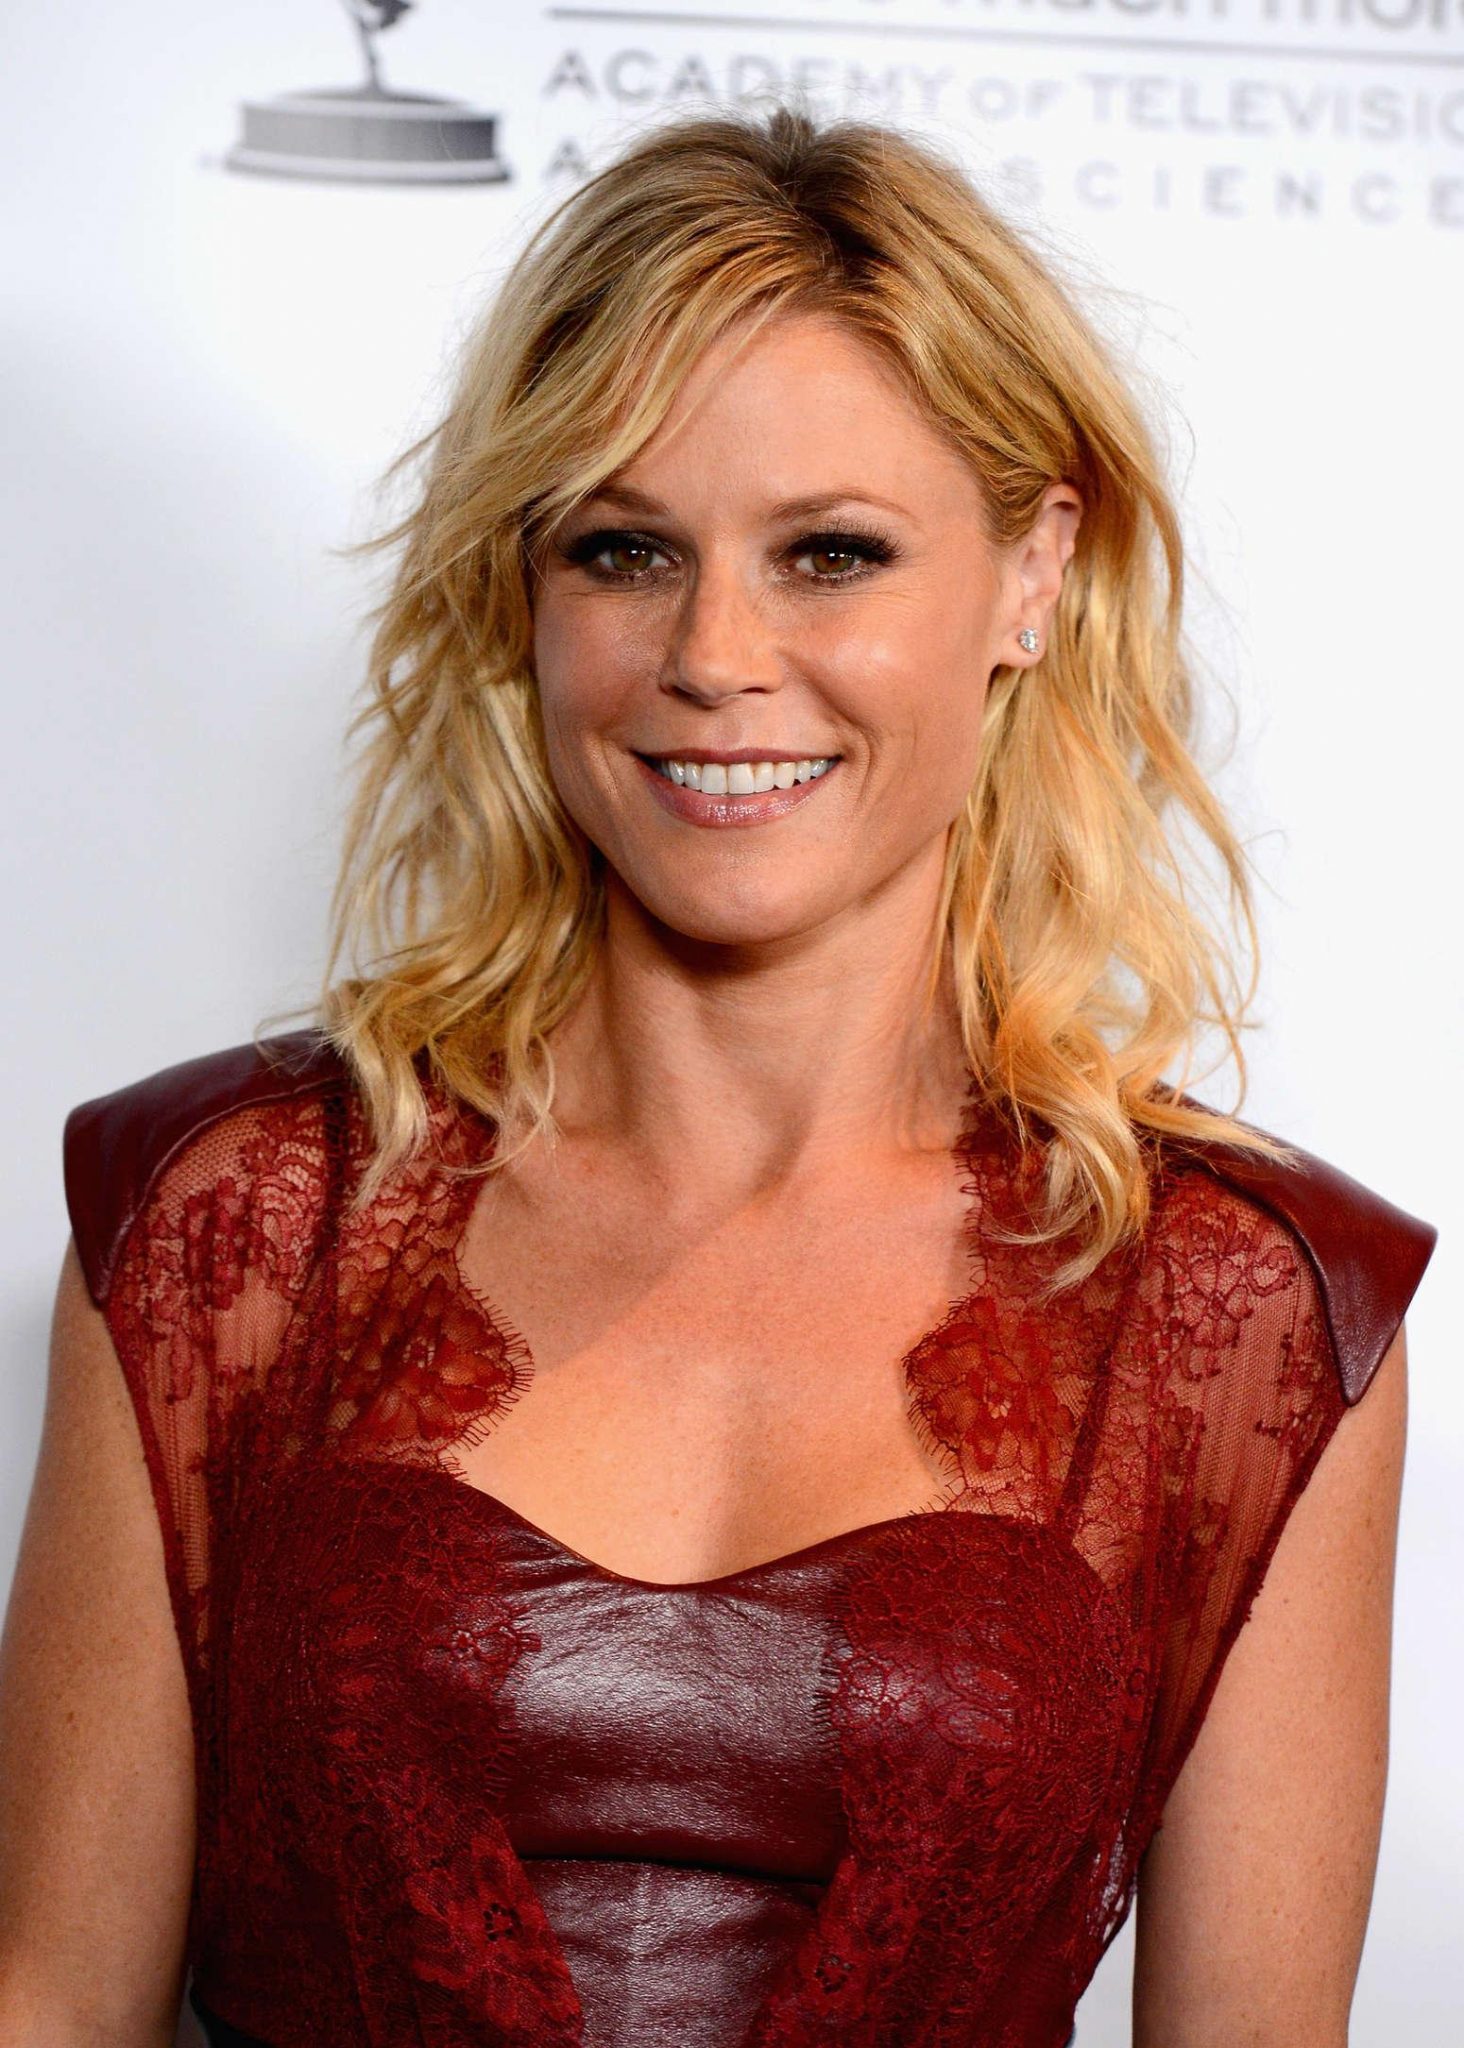 49 Julie Bowen Nude Pictures Are Sure To Keep You At The Edge Of Your Seat 324